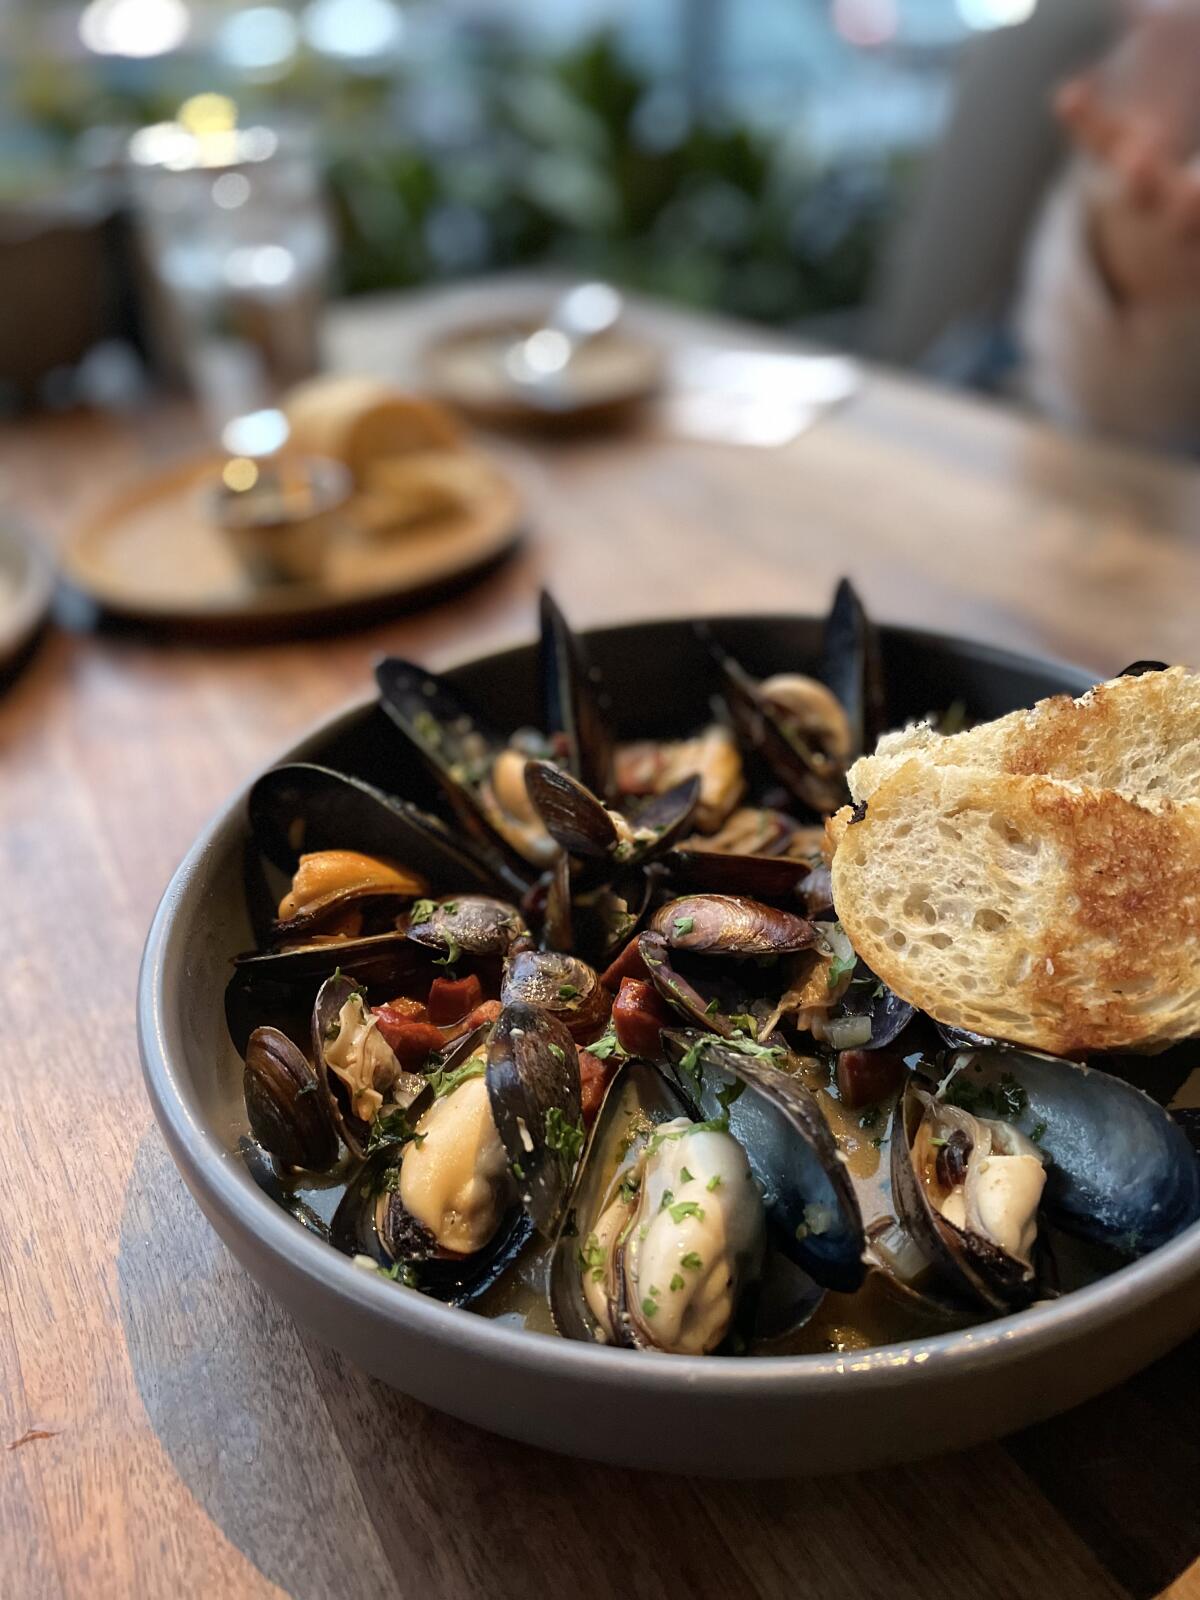 The steamed clams with andouille sausage at King’s Fish House is great for sharing.